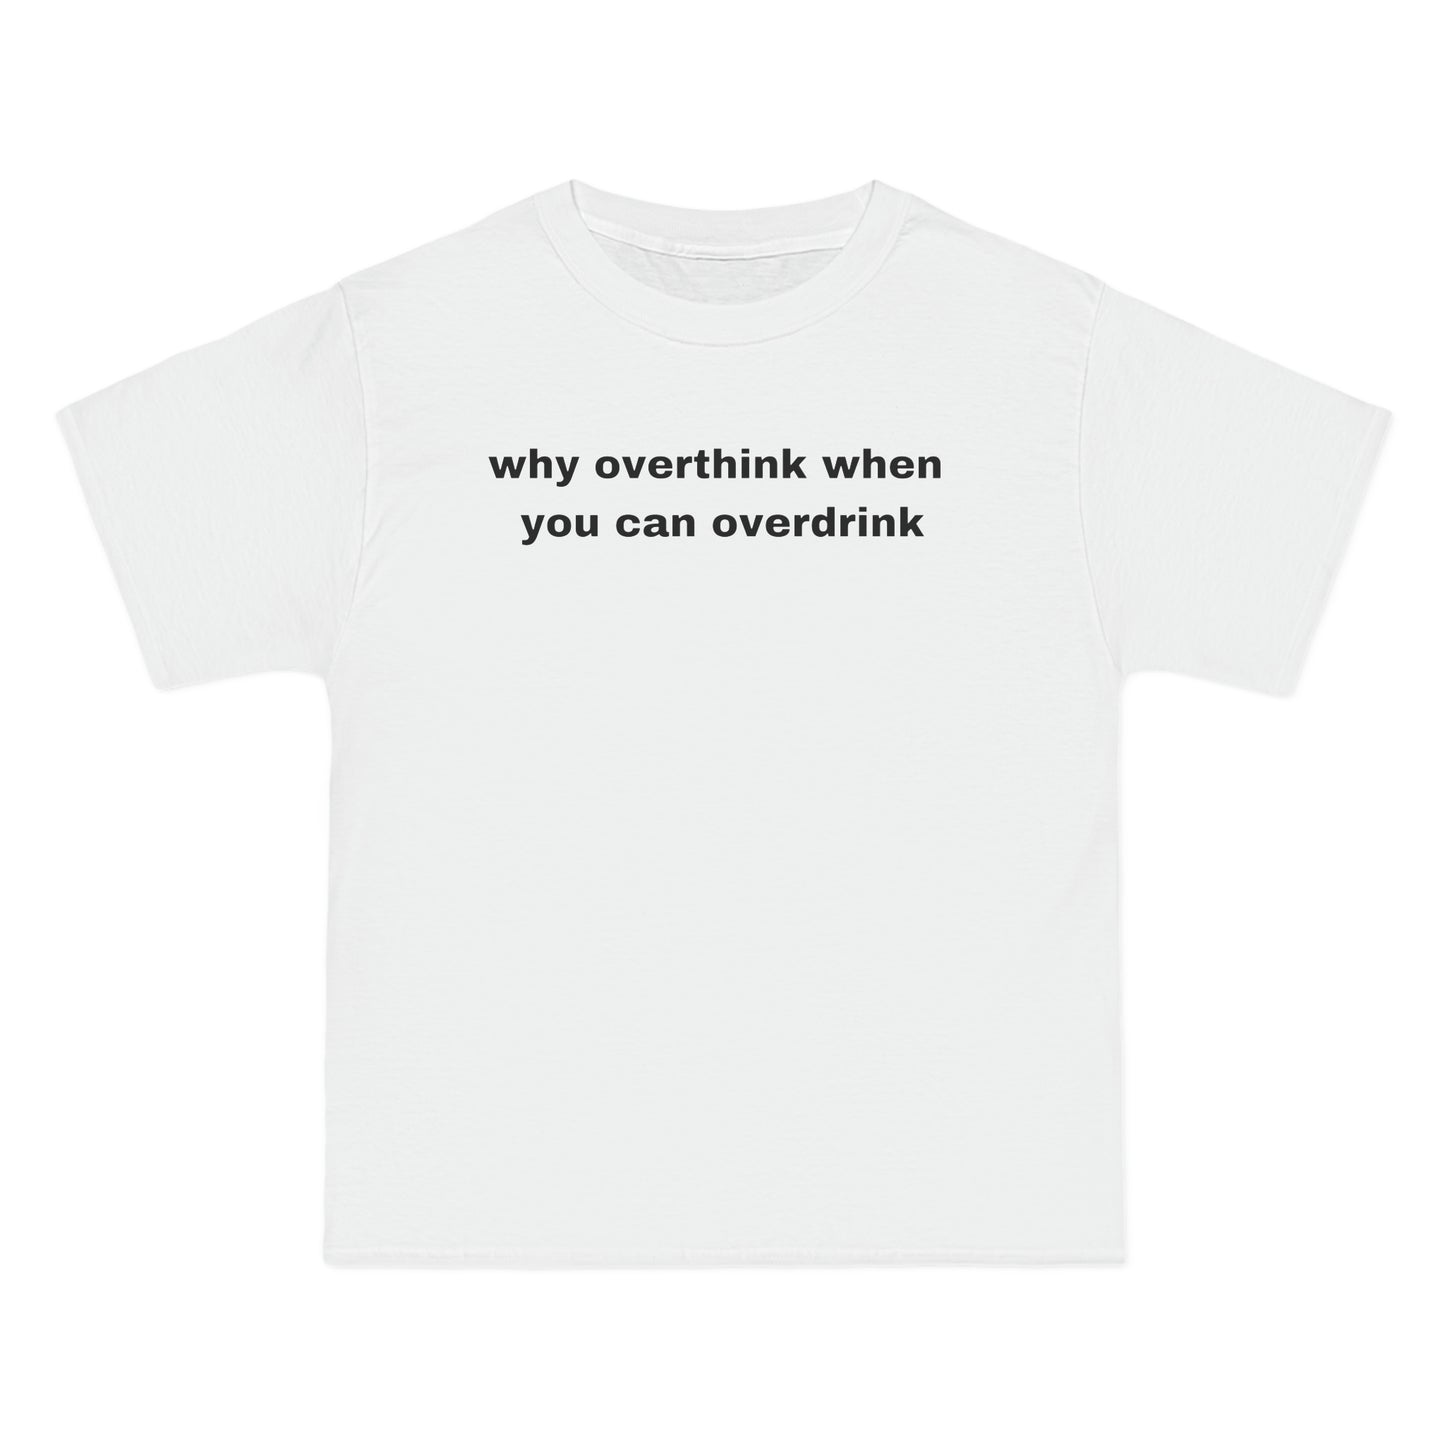 why overthink when  you can overdrink Tee